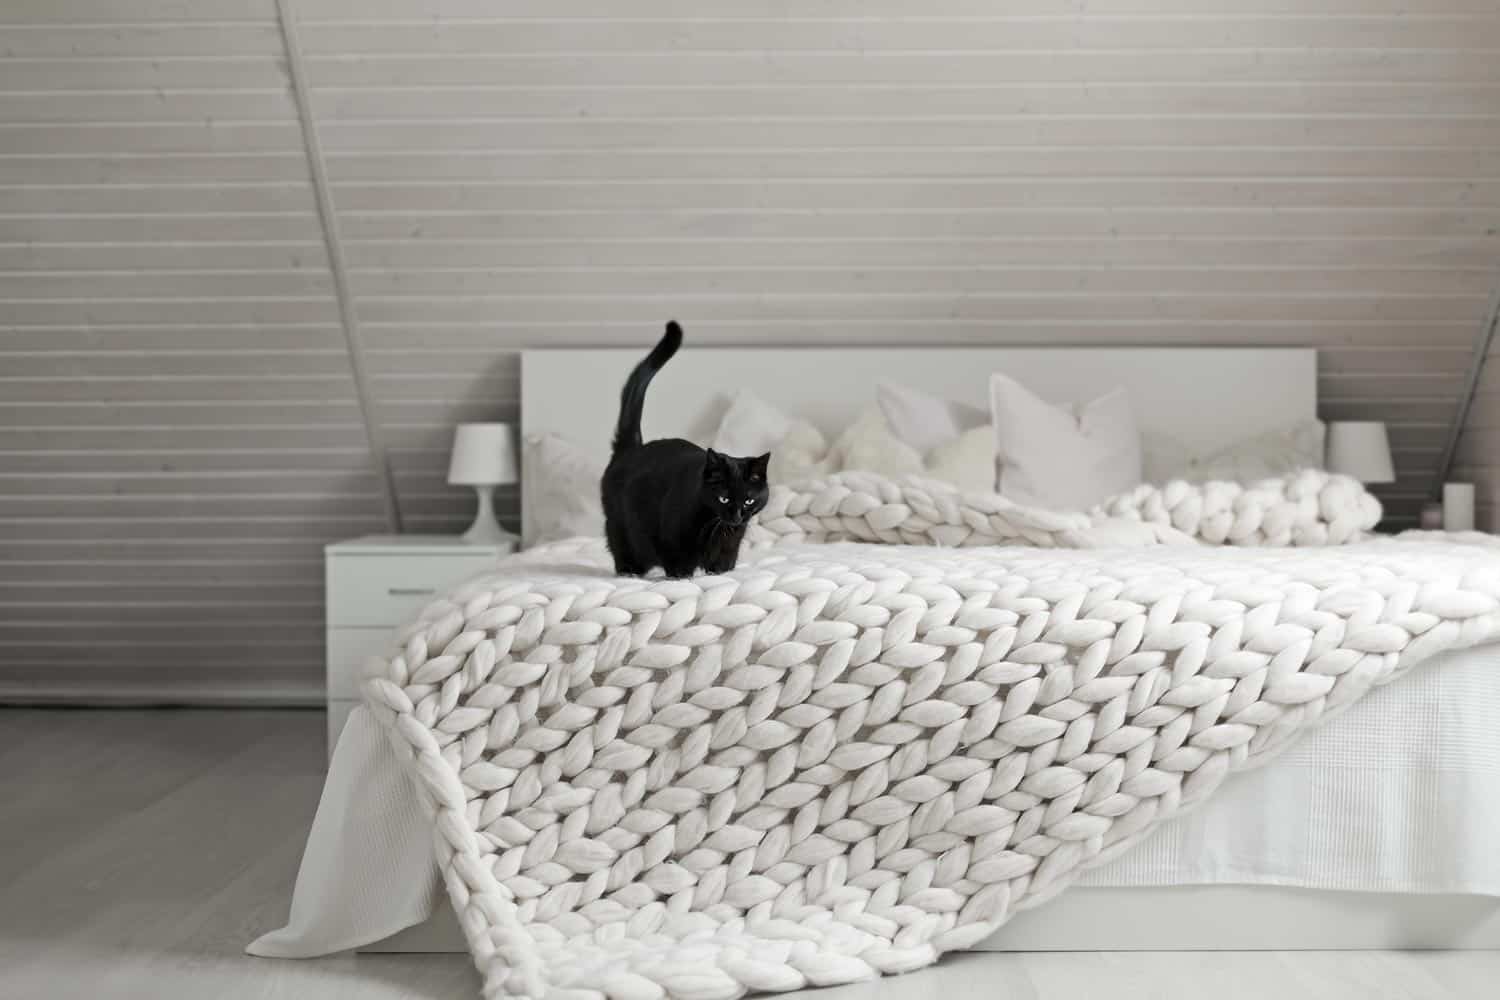 Black cat on beautiful merino woolen plaid decorated bed and floor